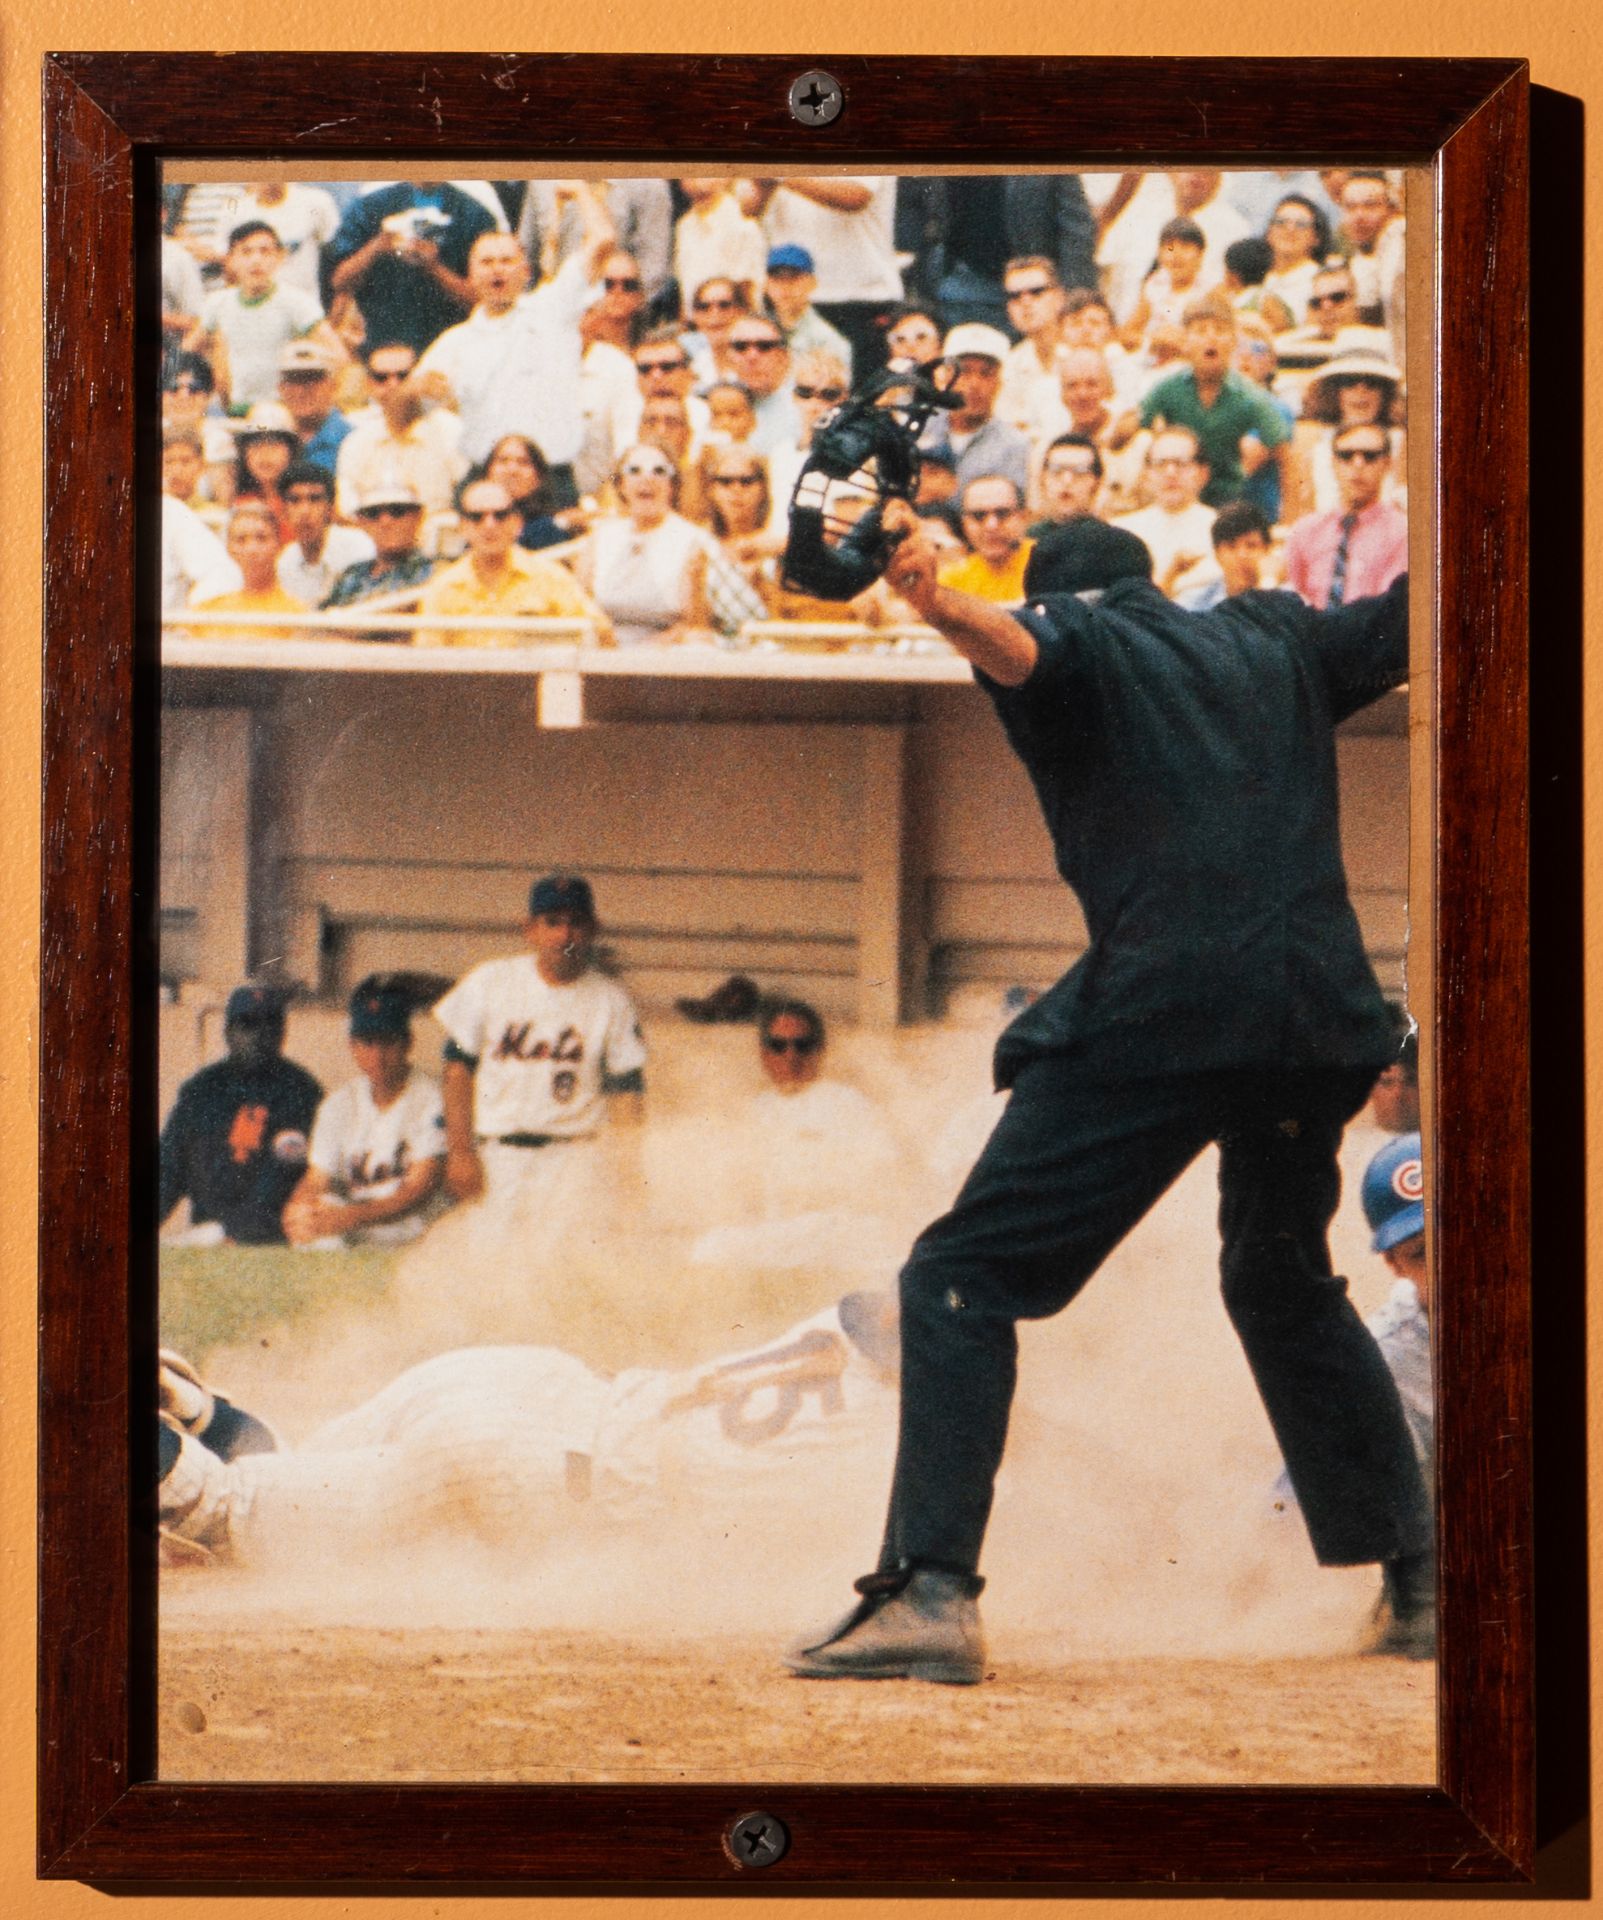 Mets Vs Cubs Play At The Plate Framed Photo 9"x12"